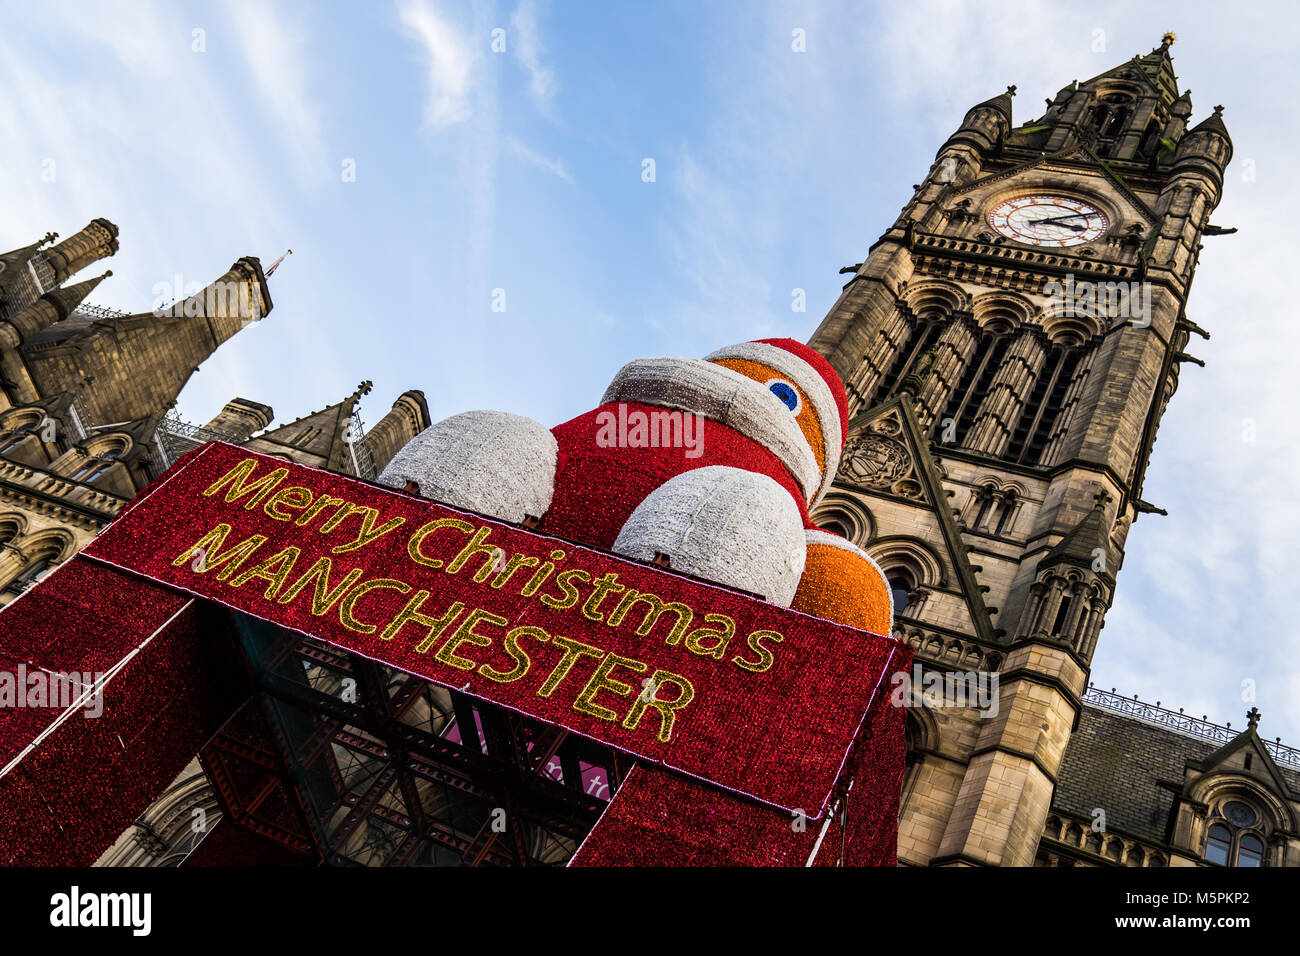 A day in Manchester christmas markets. Stock Photo